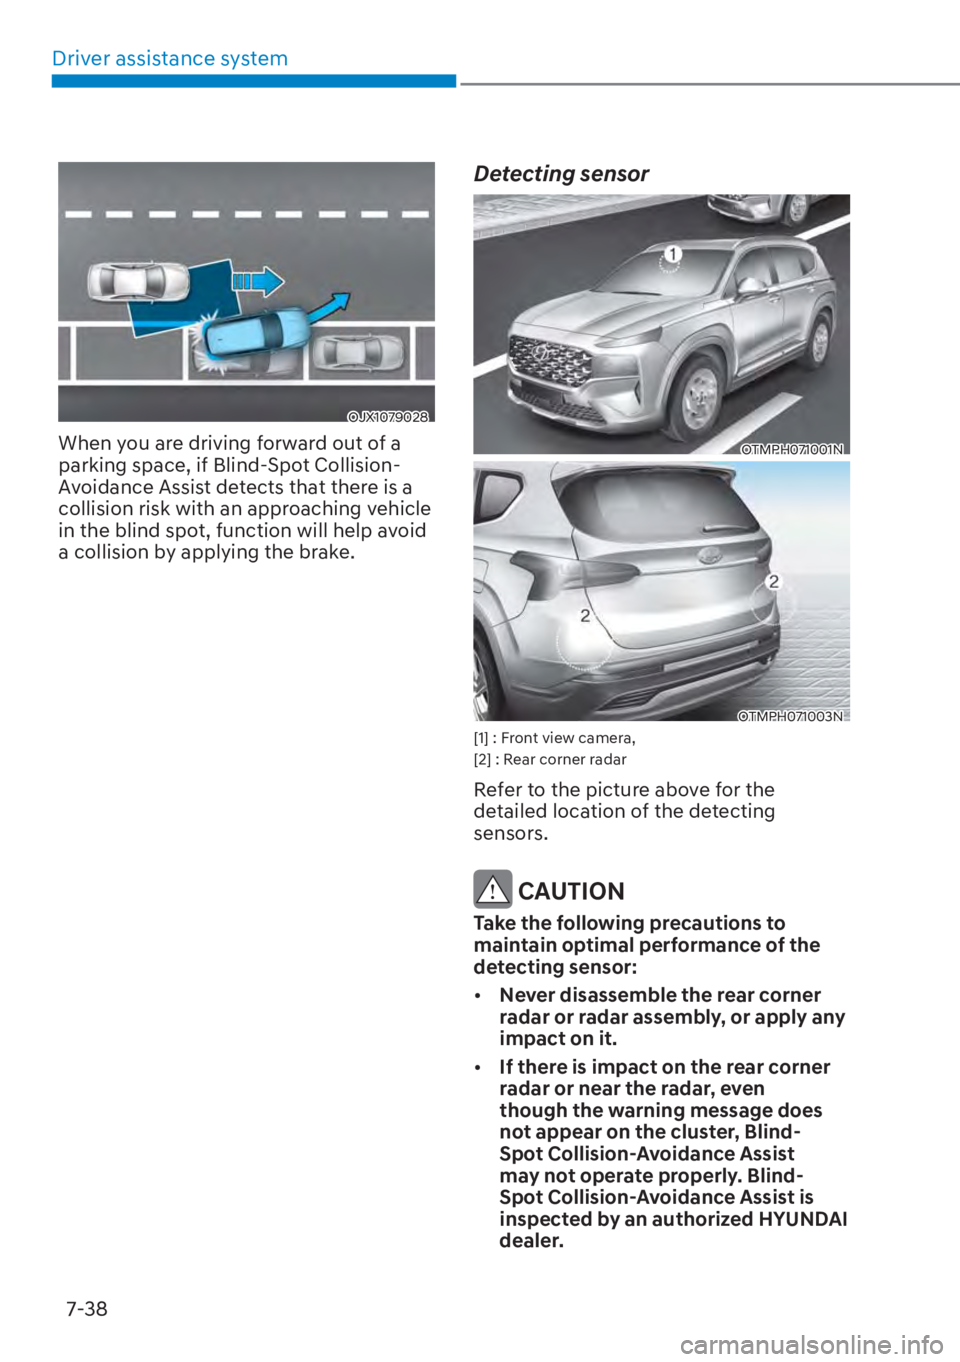 HYUNDAI SANTA FE HYBRID 2023  Owners Manual Driver assistance system7-38
OJX1079028
When you are driving forward out of a 
parking space, if Blind-Spot Collision-
Avoidance Assist detects that there is a 
collision risk with an approaching vehi